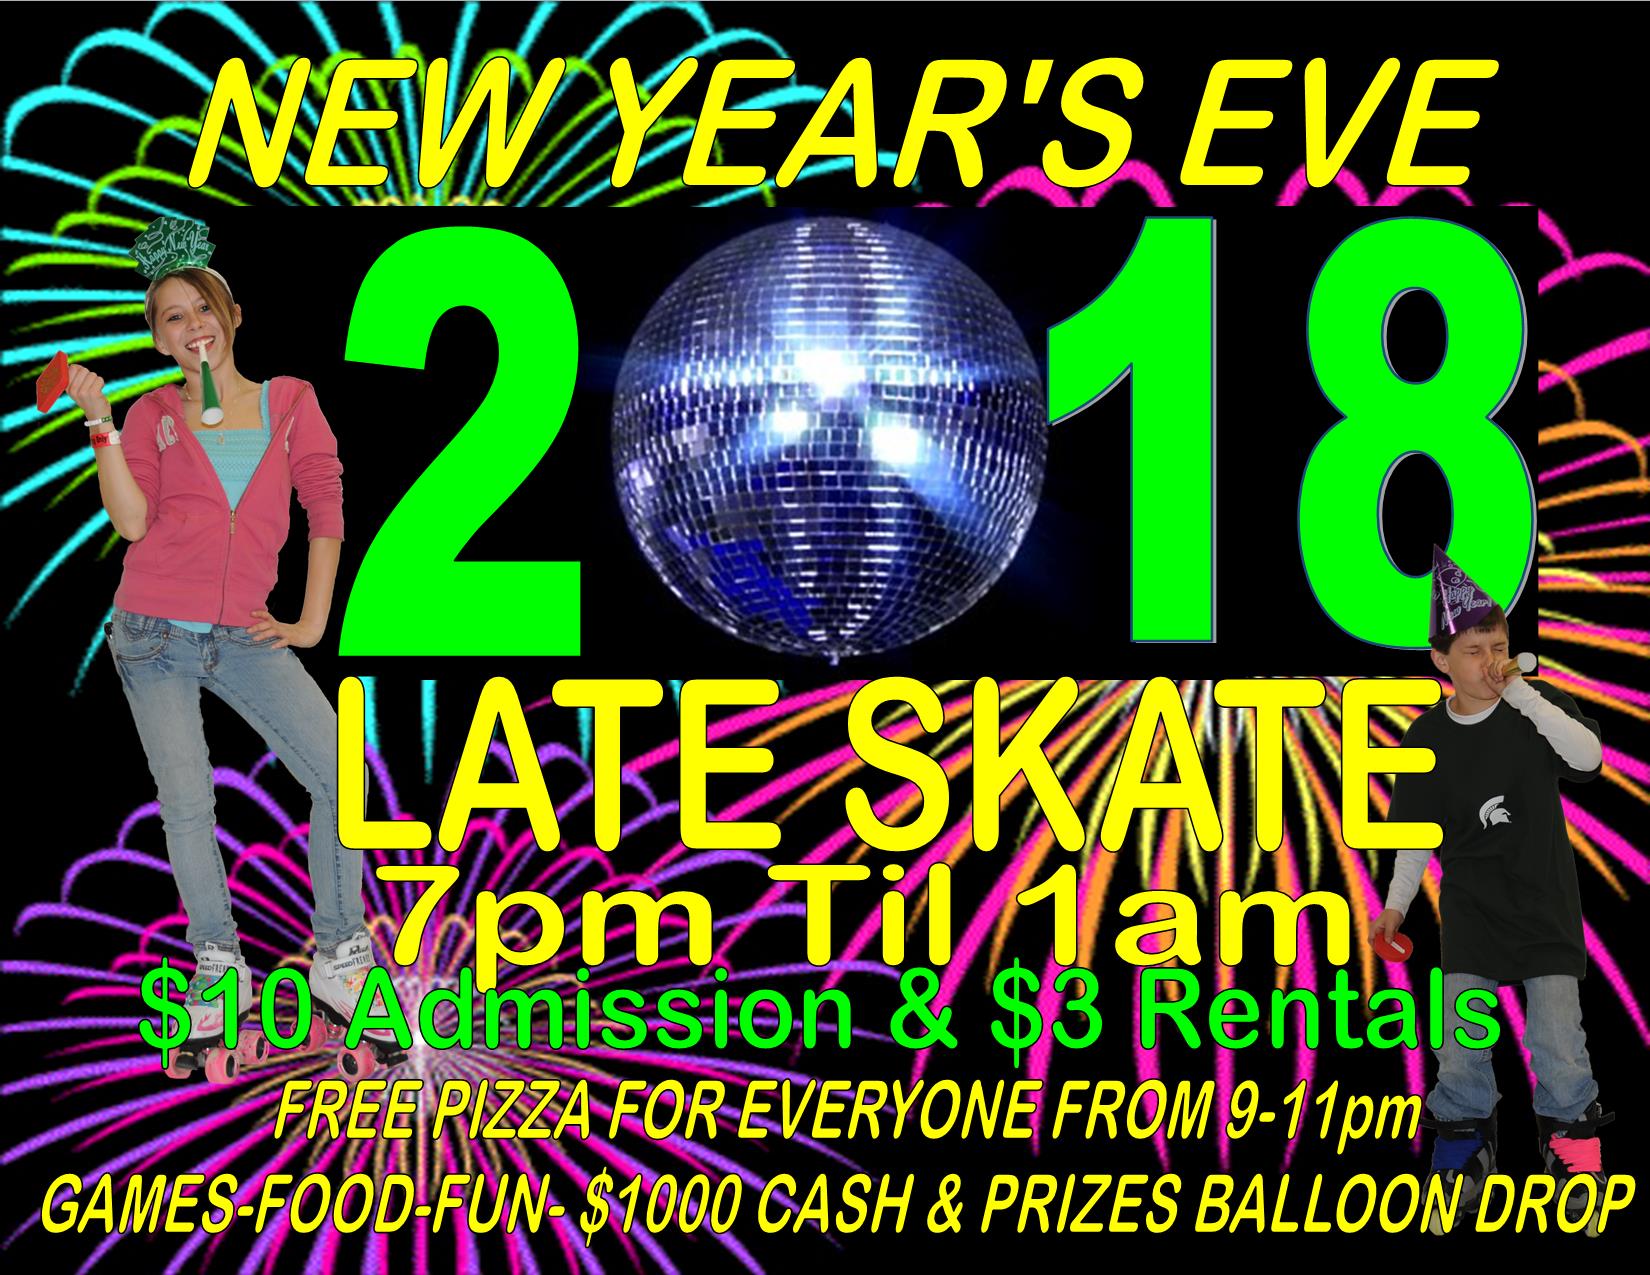 New Year's Eve Late Night Skate 2